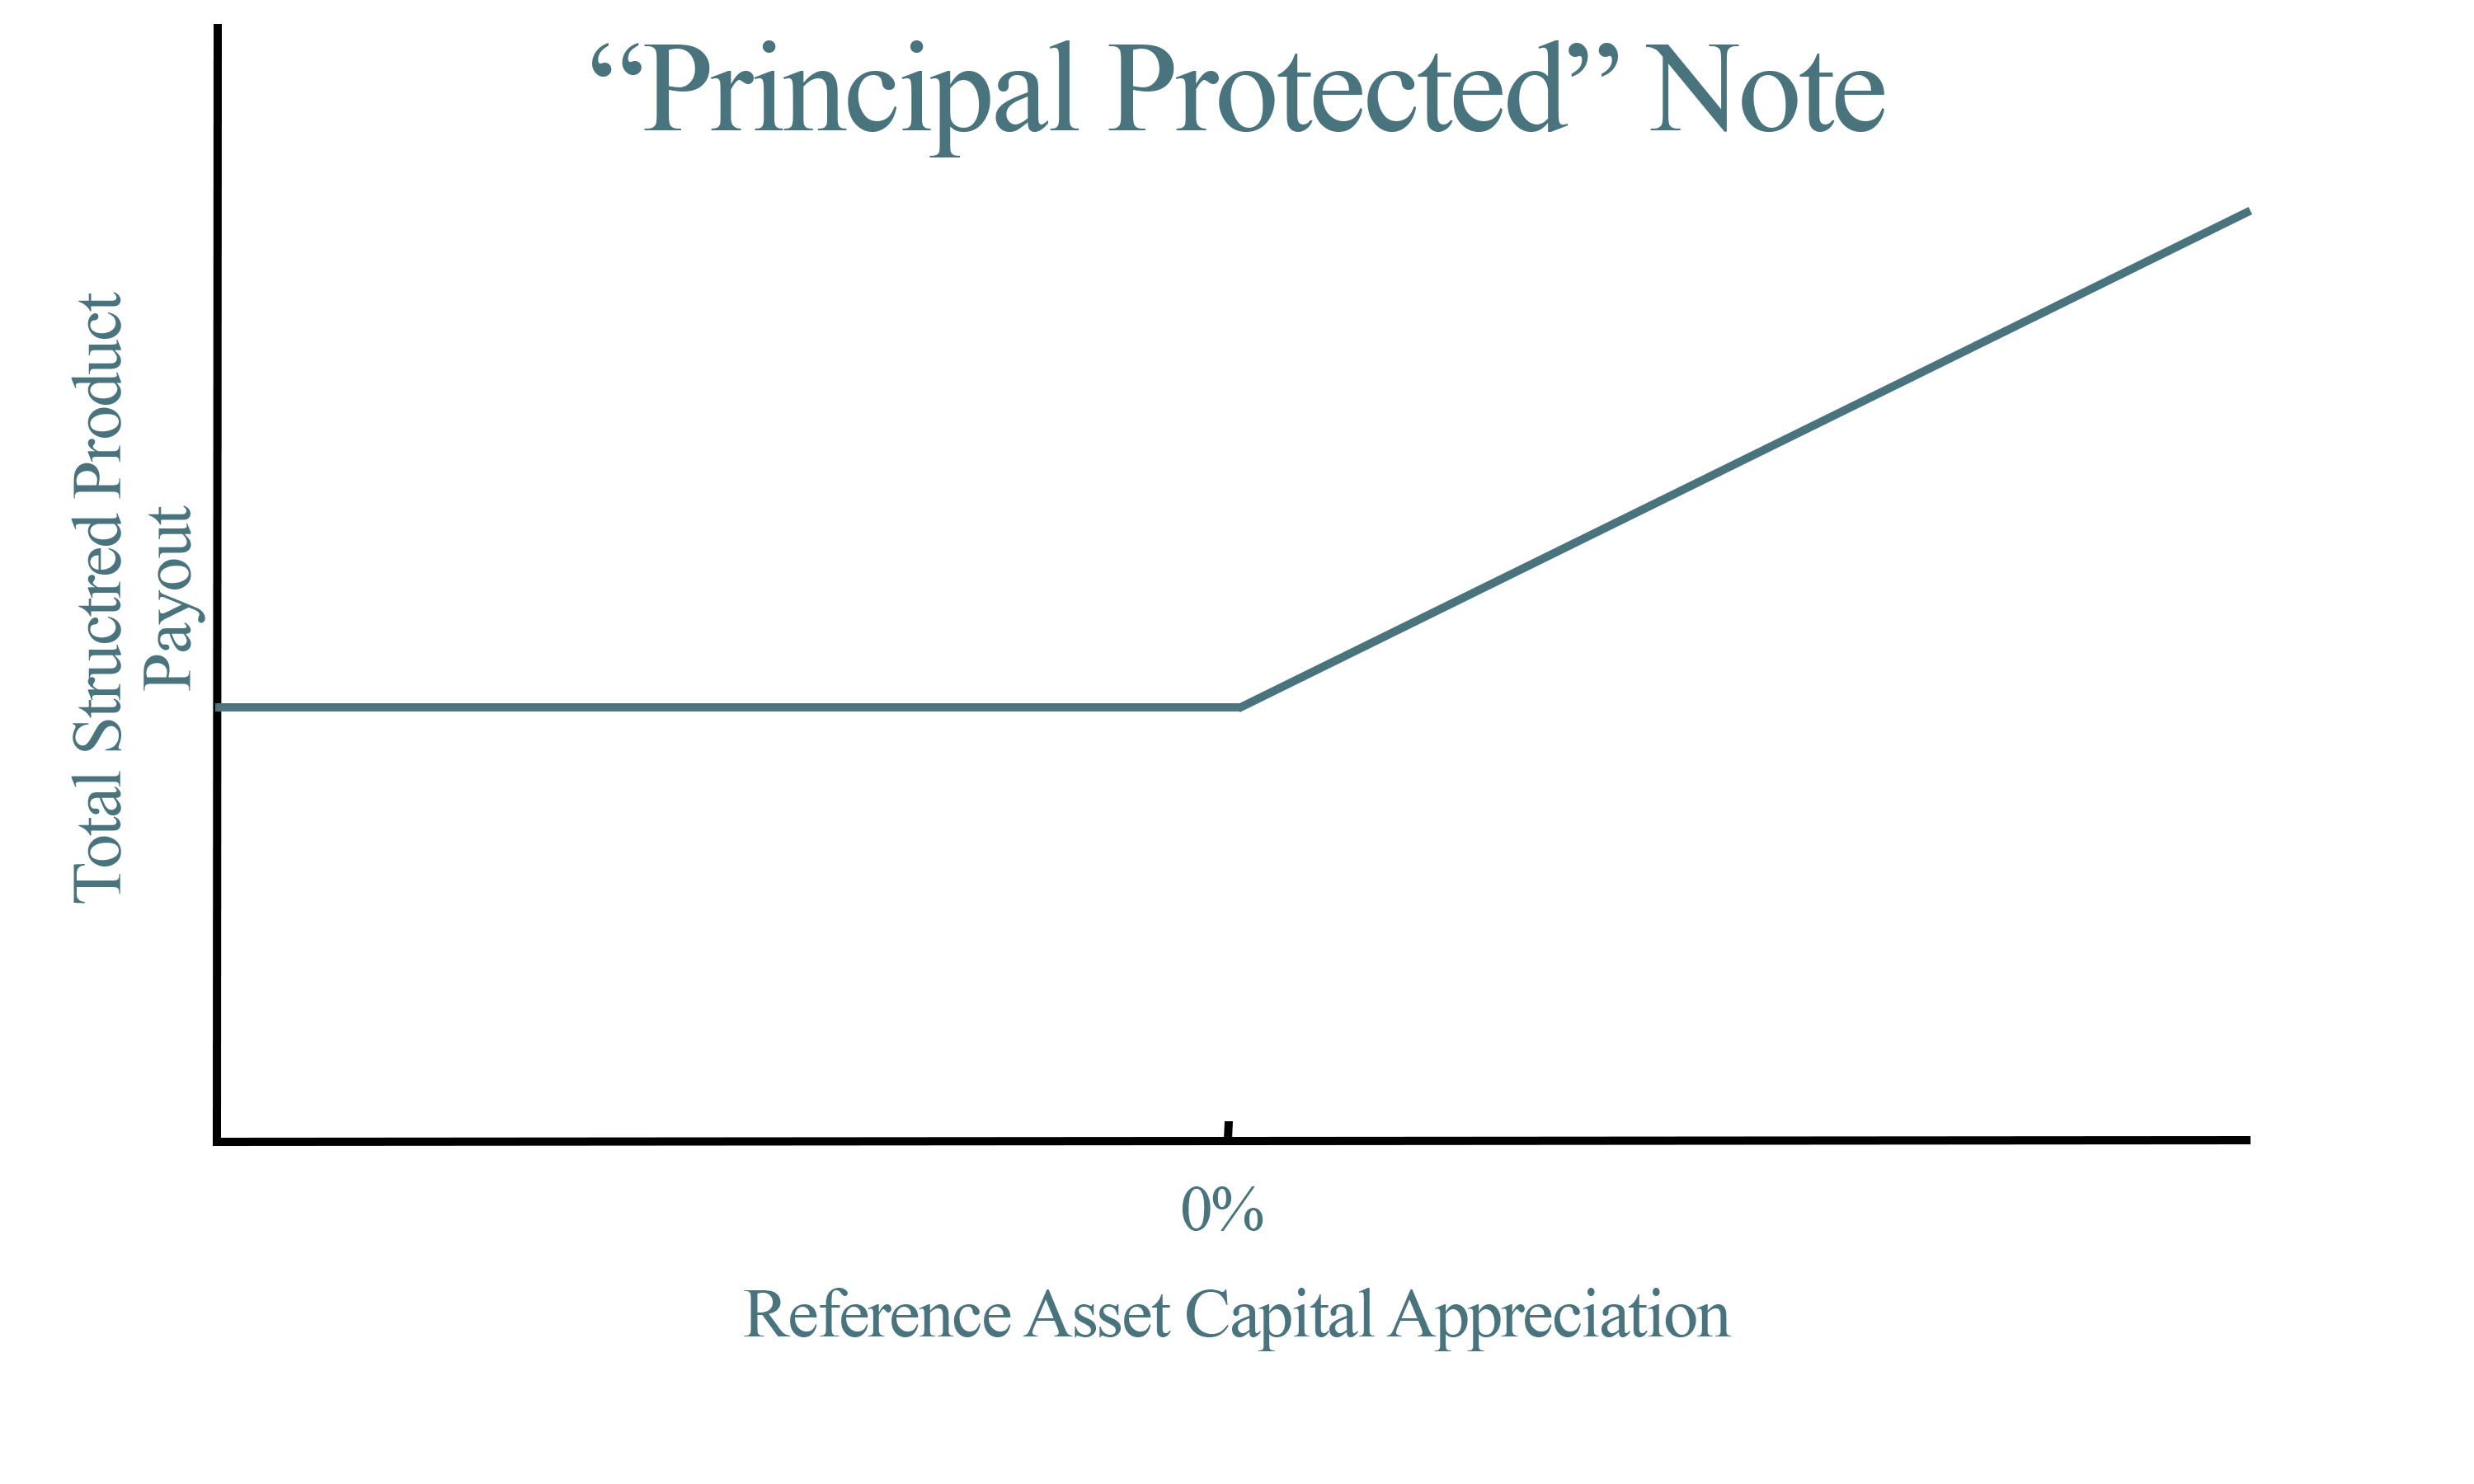 A graph demonstrating payout over capital appreciation for Principal Protected Notes